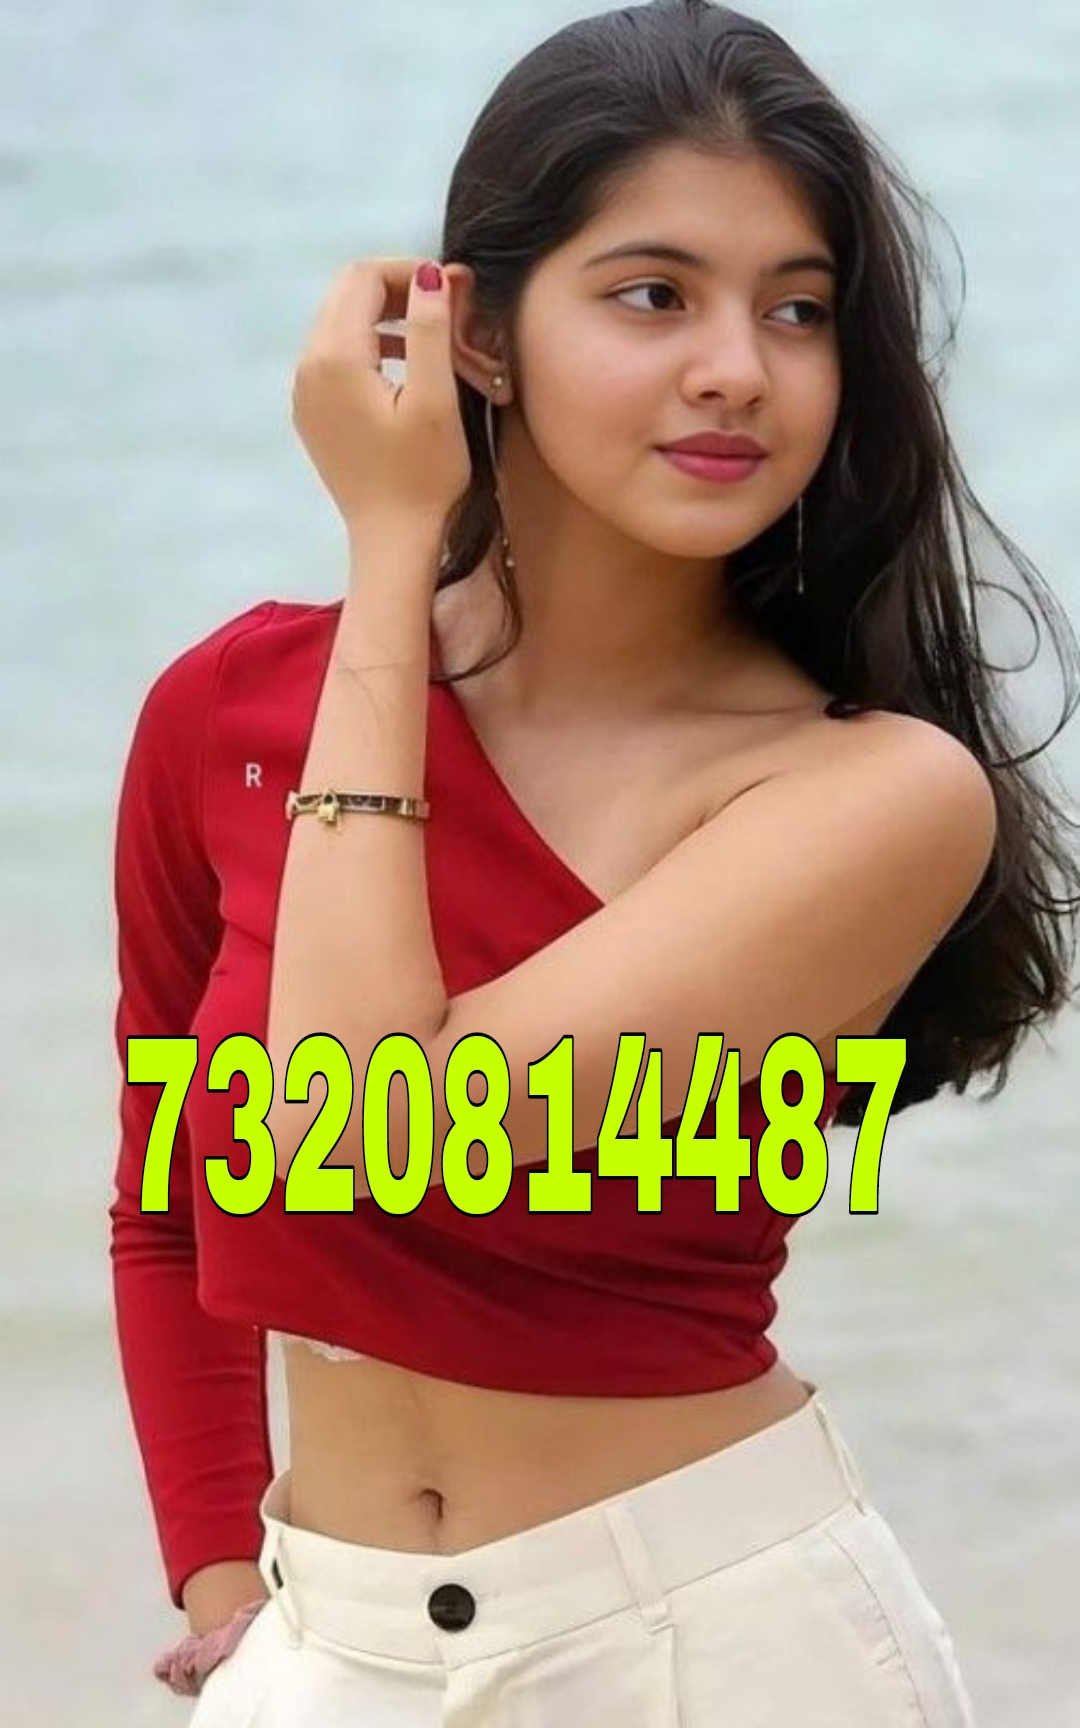 AZAMGARH TOP SEXY GIRL AVAILABLE GENUINE PERSON HIGH PROFILE 